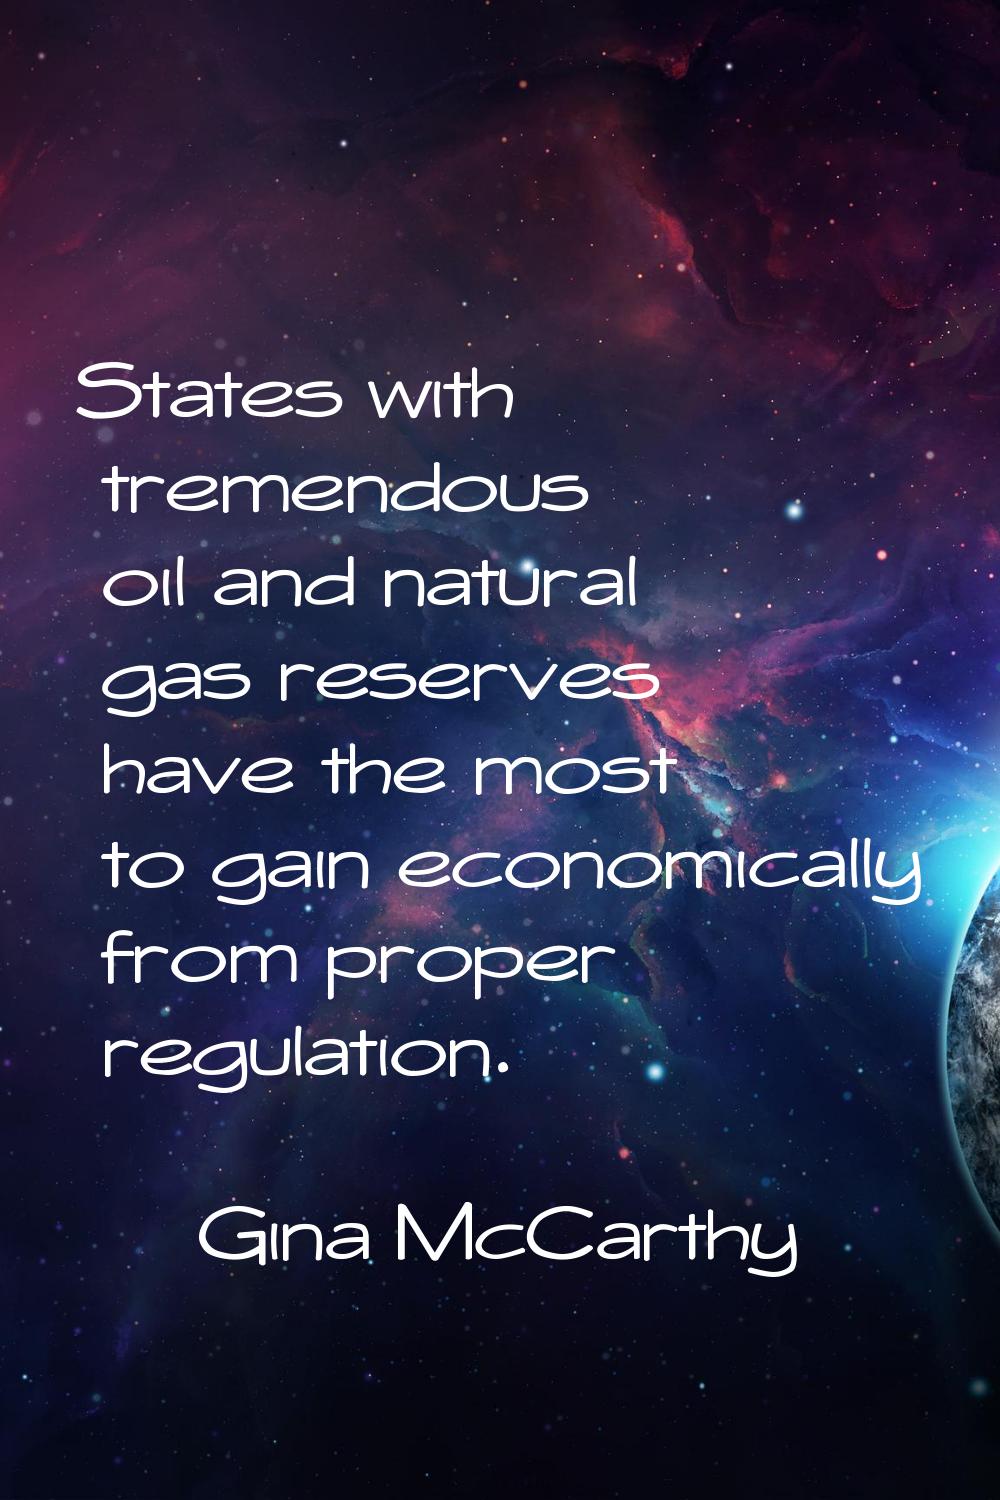 States with tremendous oil and natural gas reserves have the most to gain economically from proper 